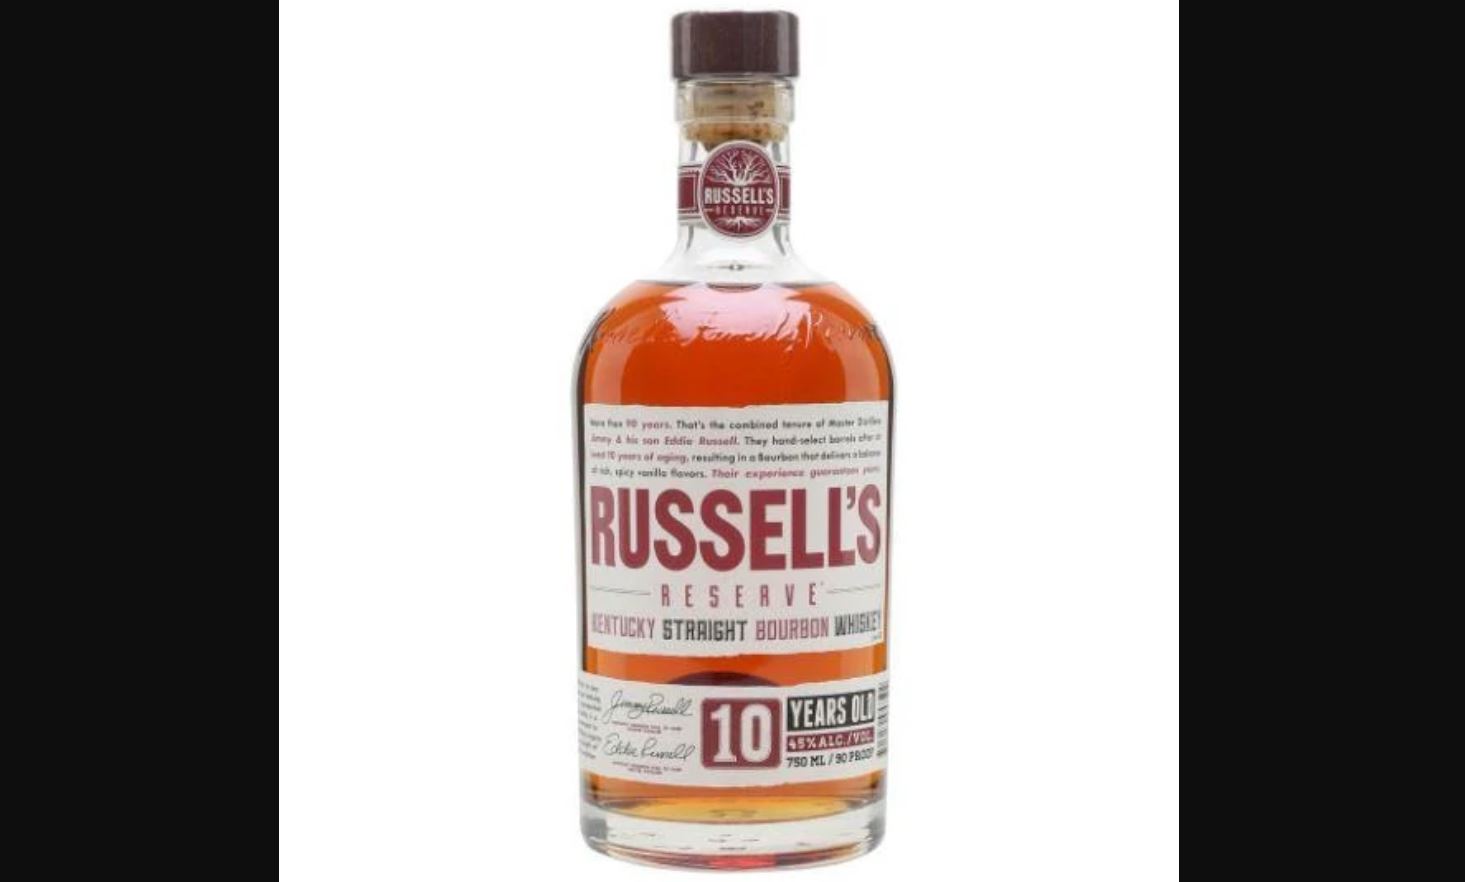 Russell’s Reserve 10